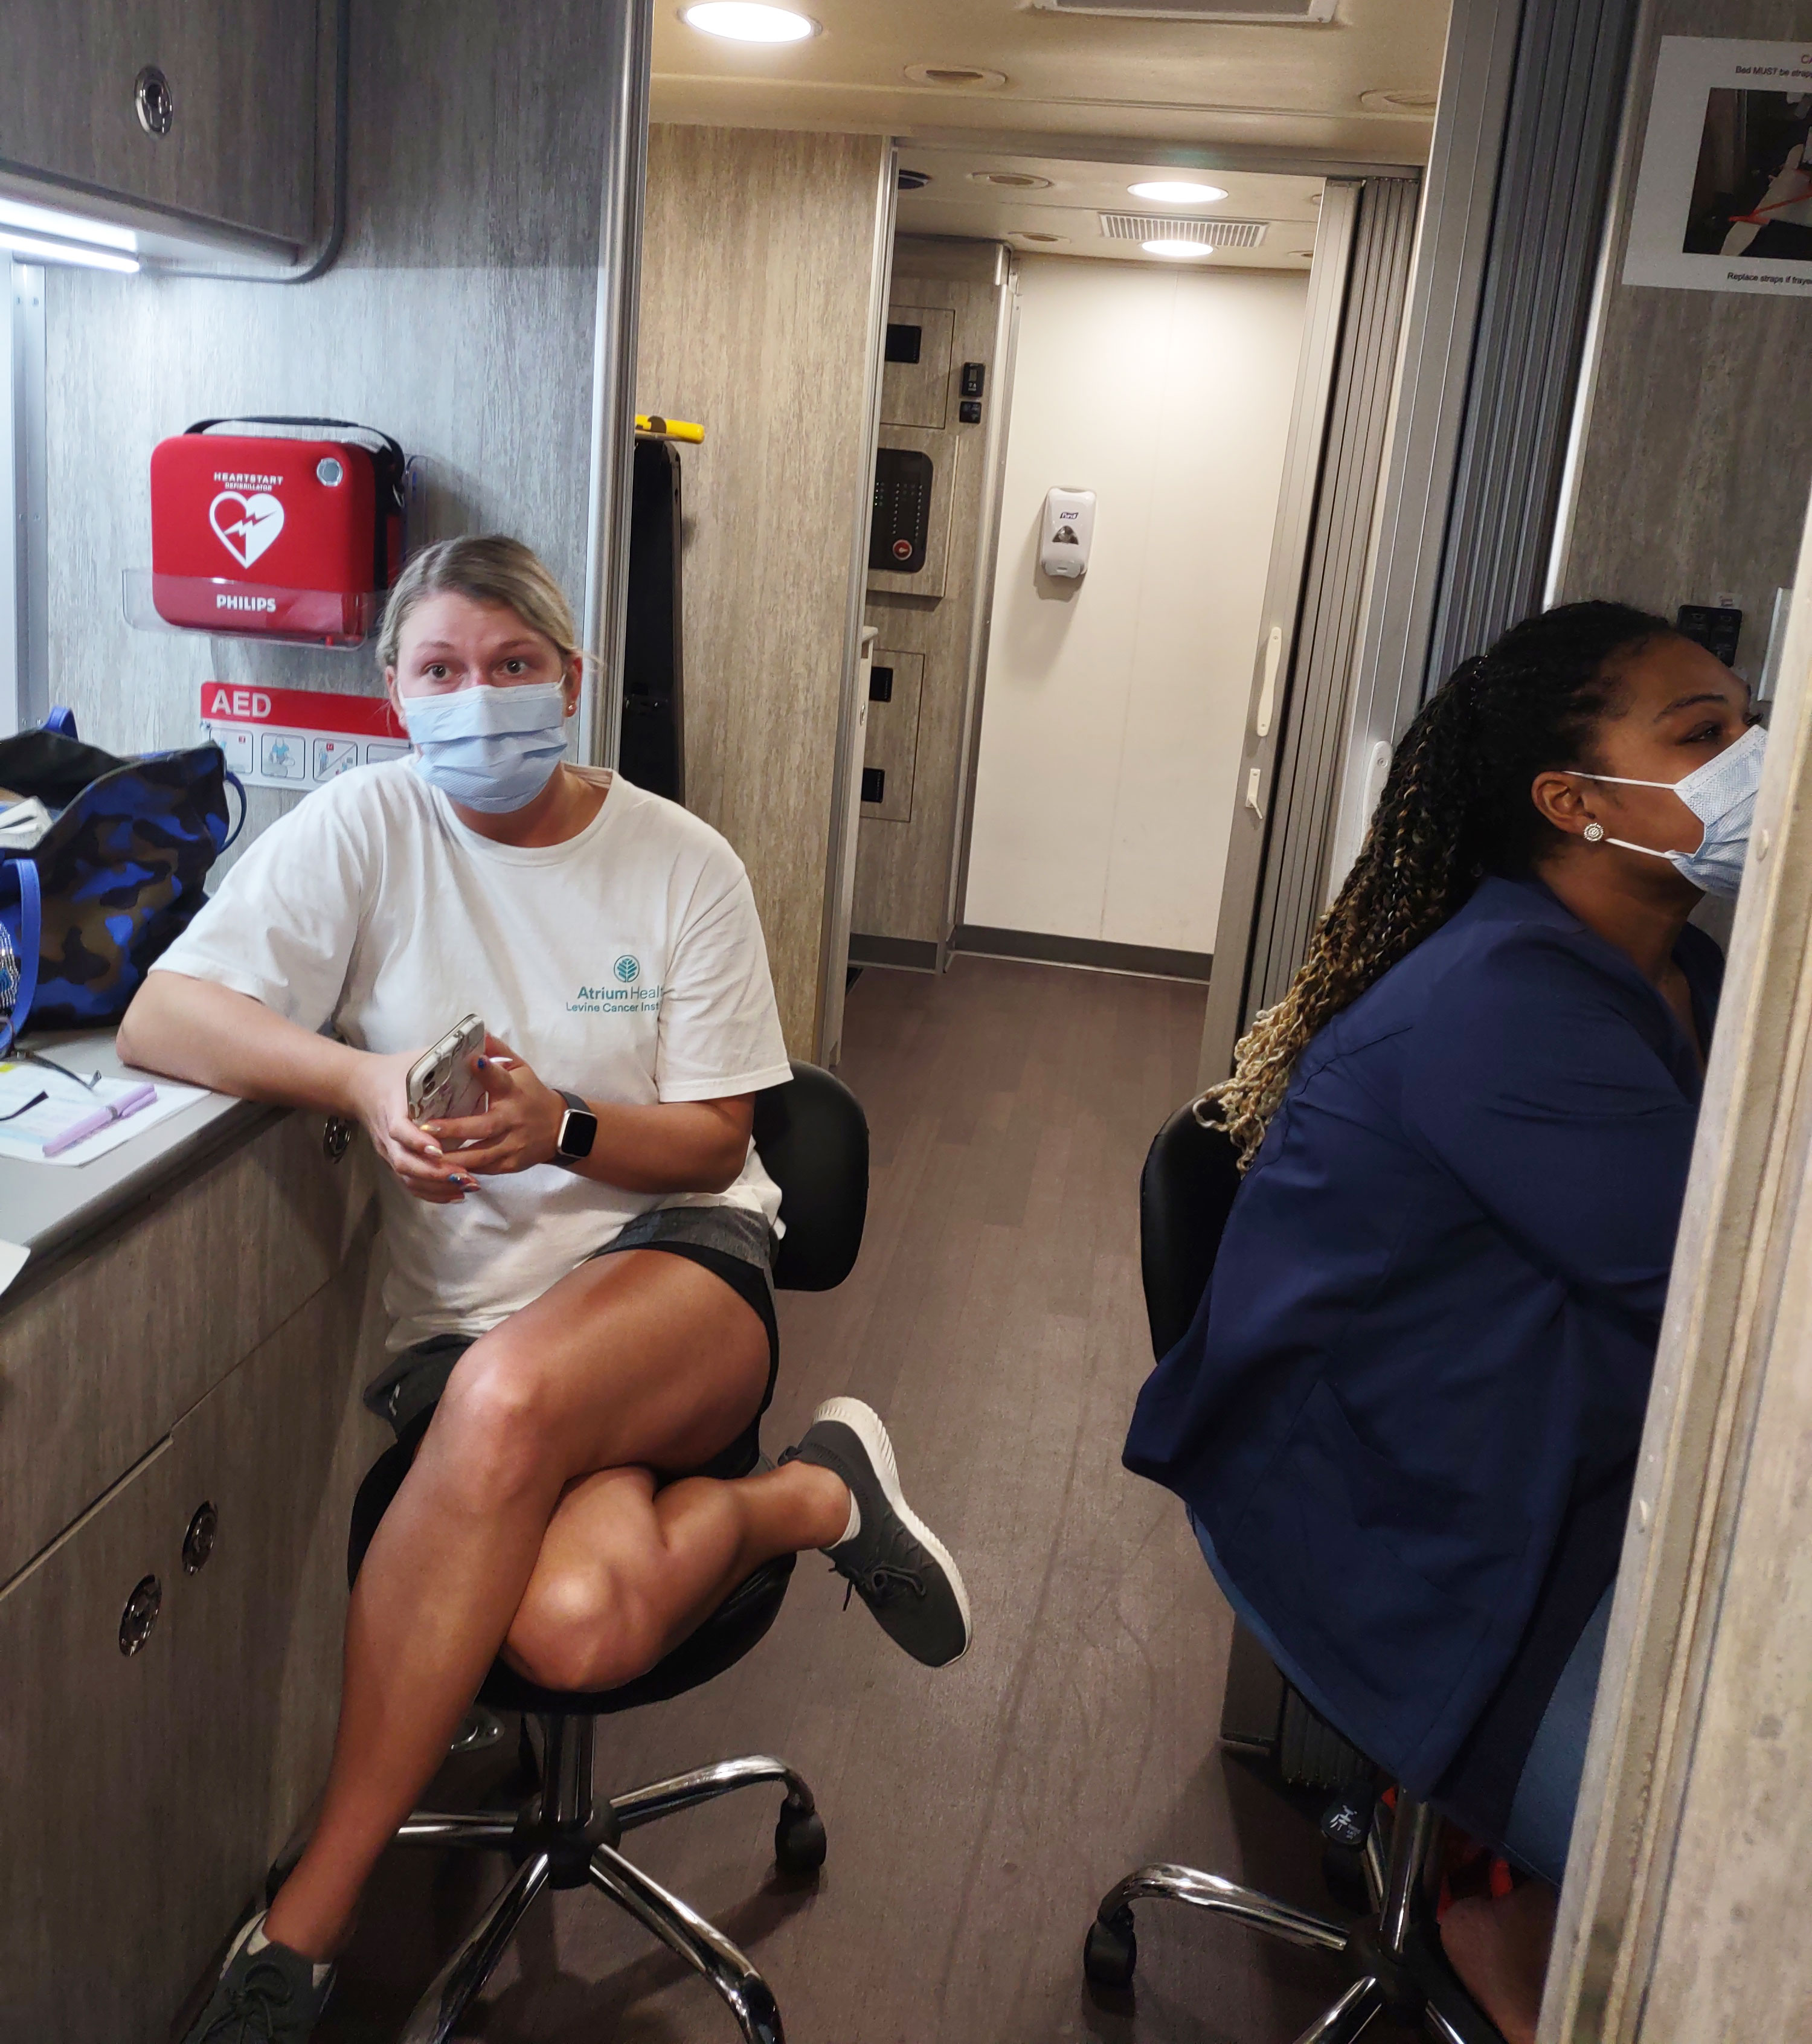 A photo shows two women sitting on stools inside of a medical bus.